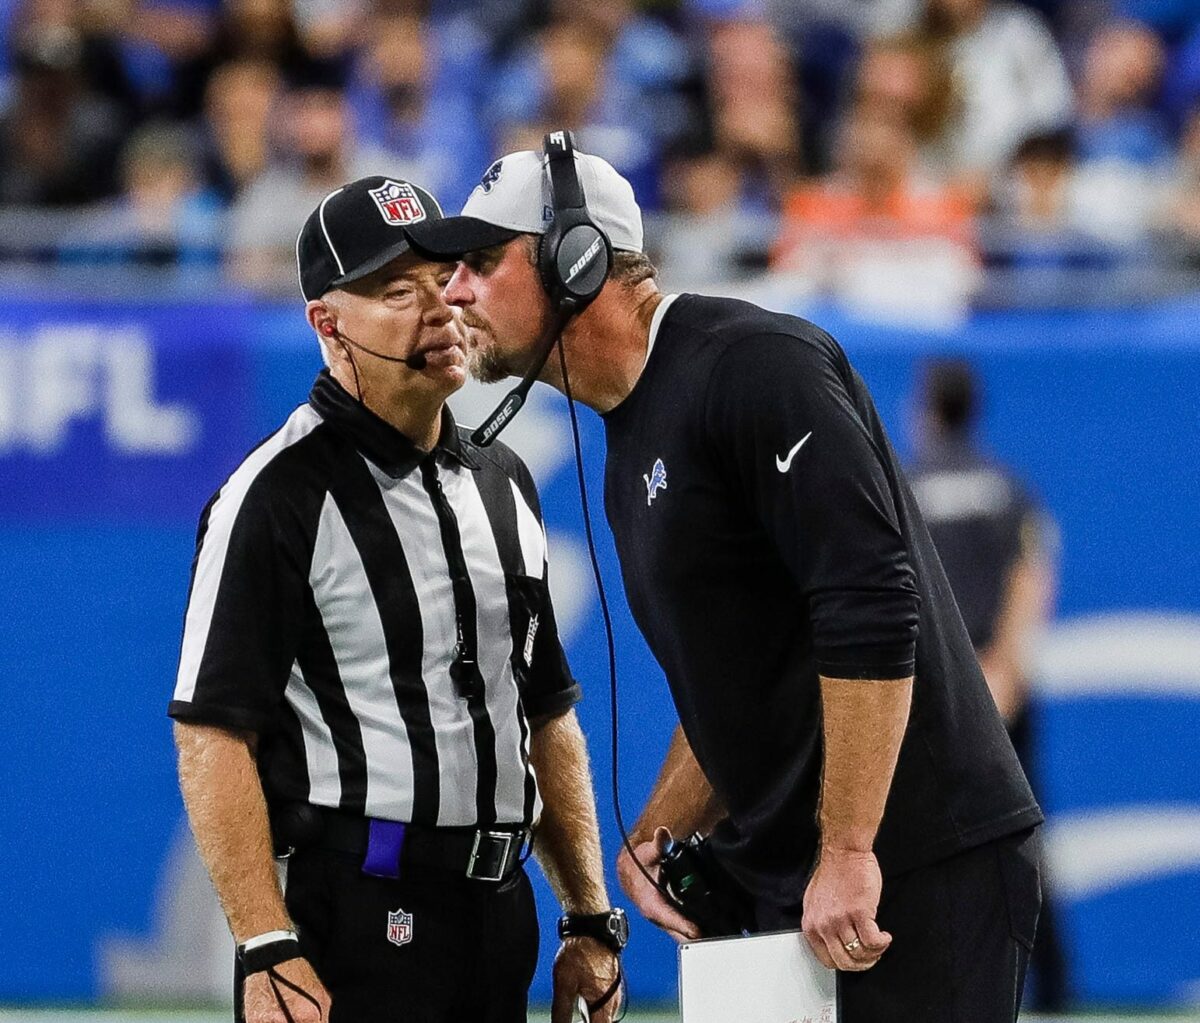 The Lions made several rule change proposals related to coach’s challenges in games